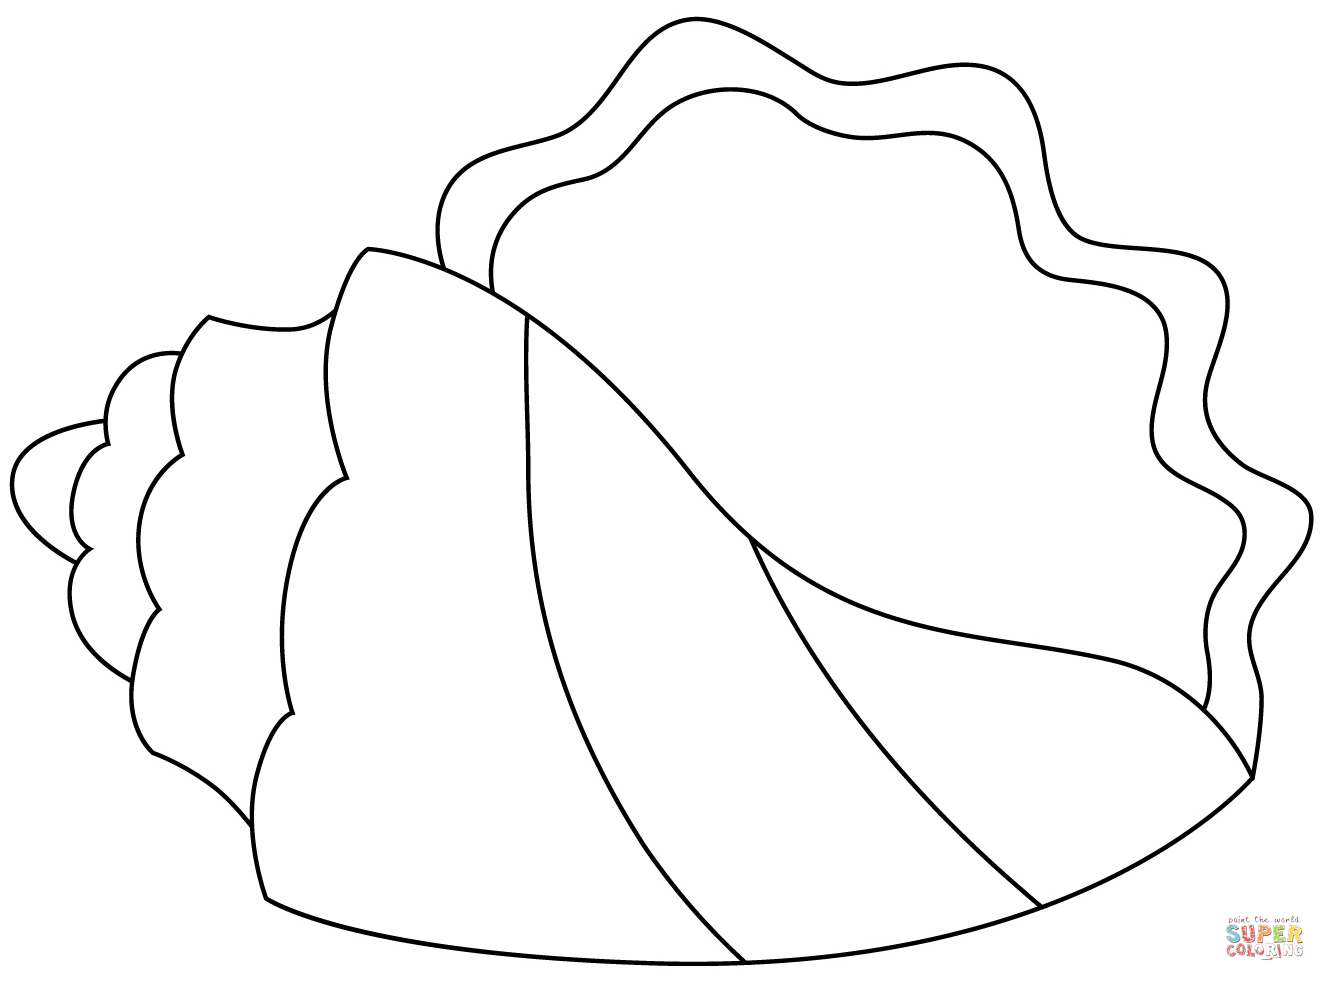 Seashell coloring page free printable coloring pages